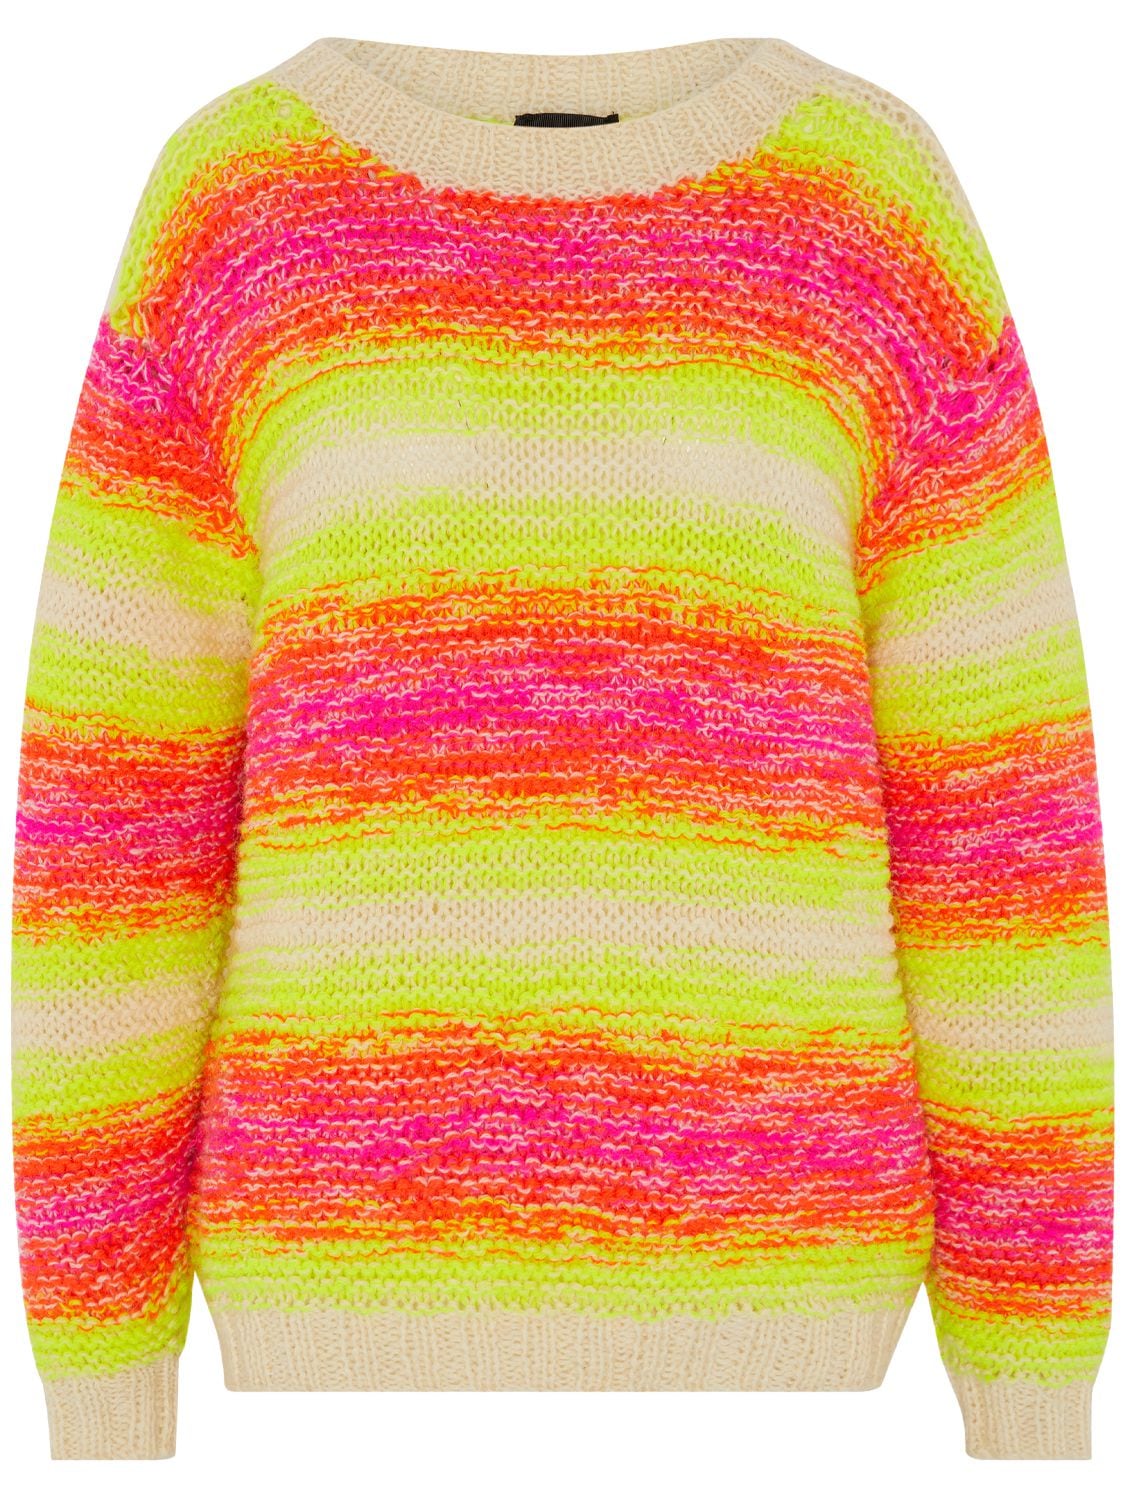 Agr Hand Knit Wool Jumper In Pink,yellow